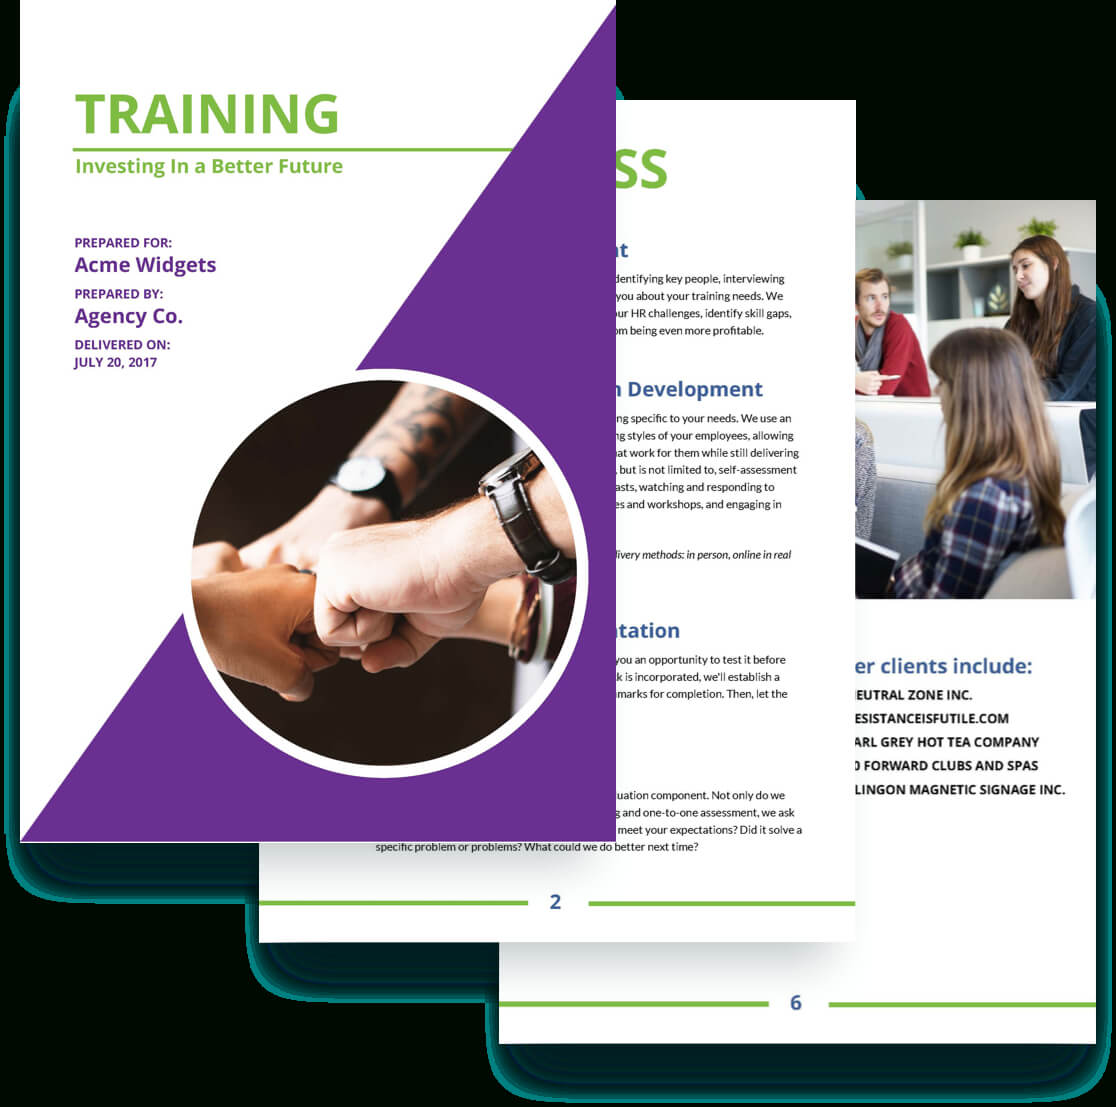 Training Proposal Template – Free Sample | Proposify Throughout Training Brochure Template